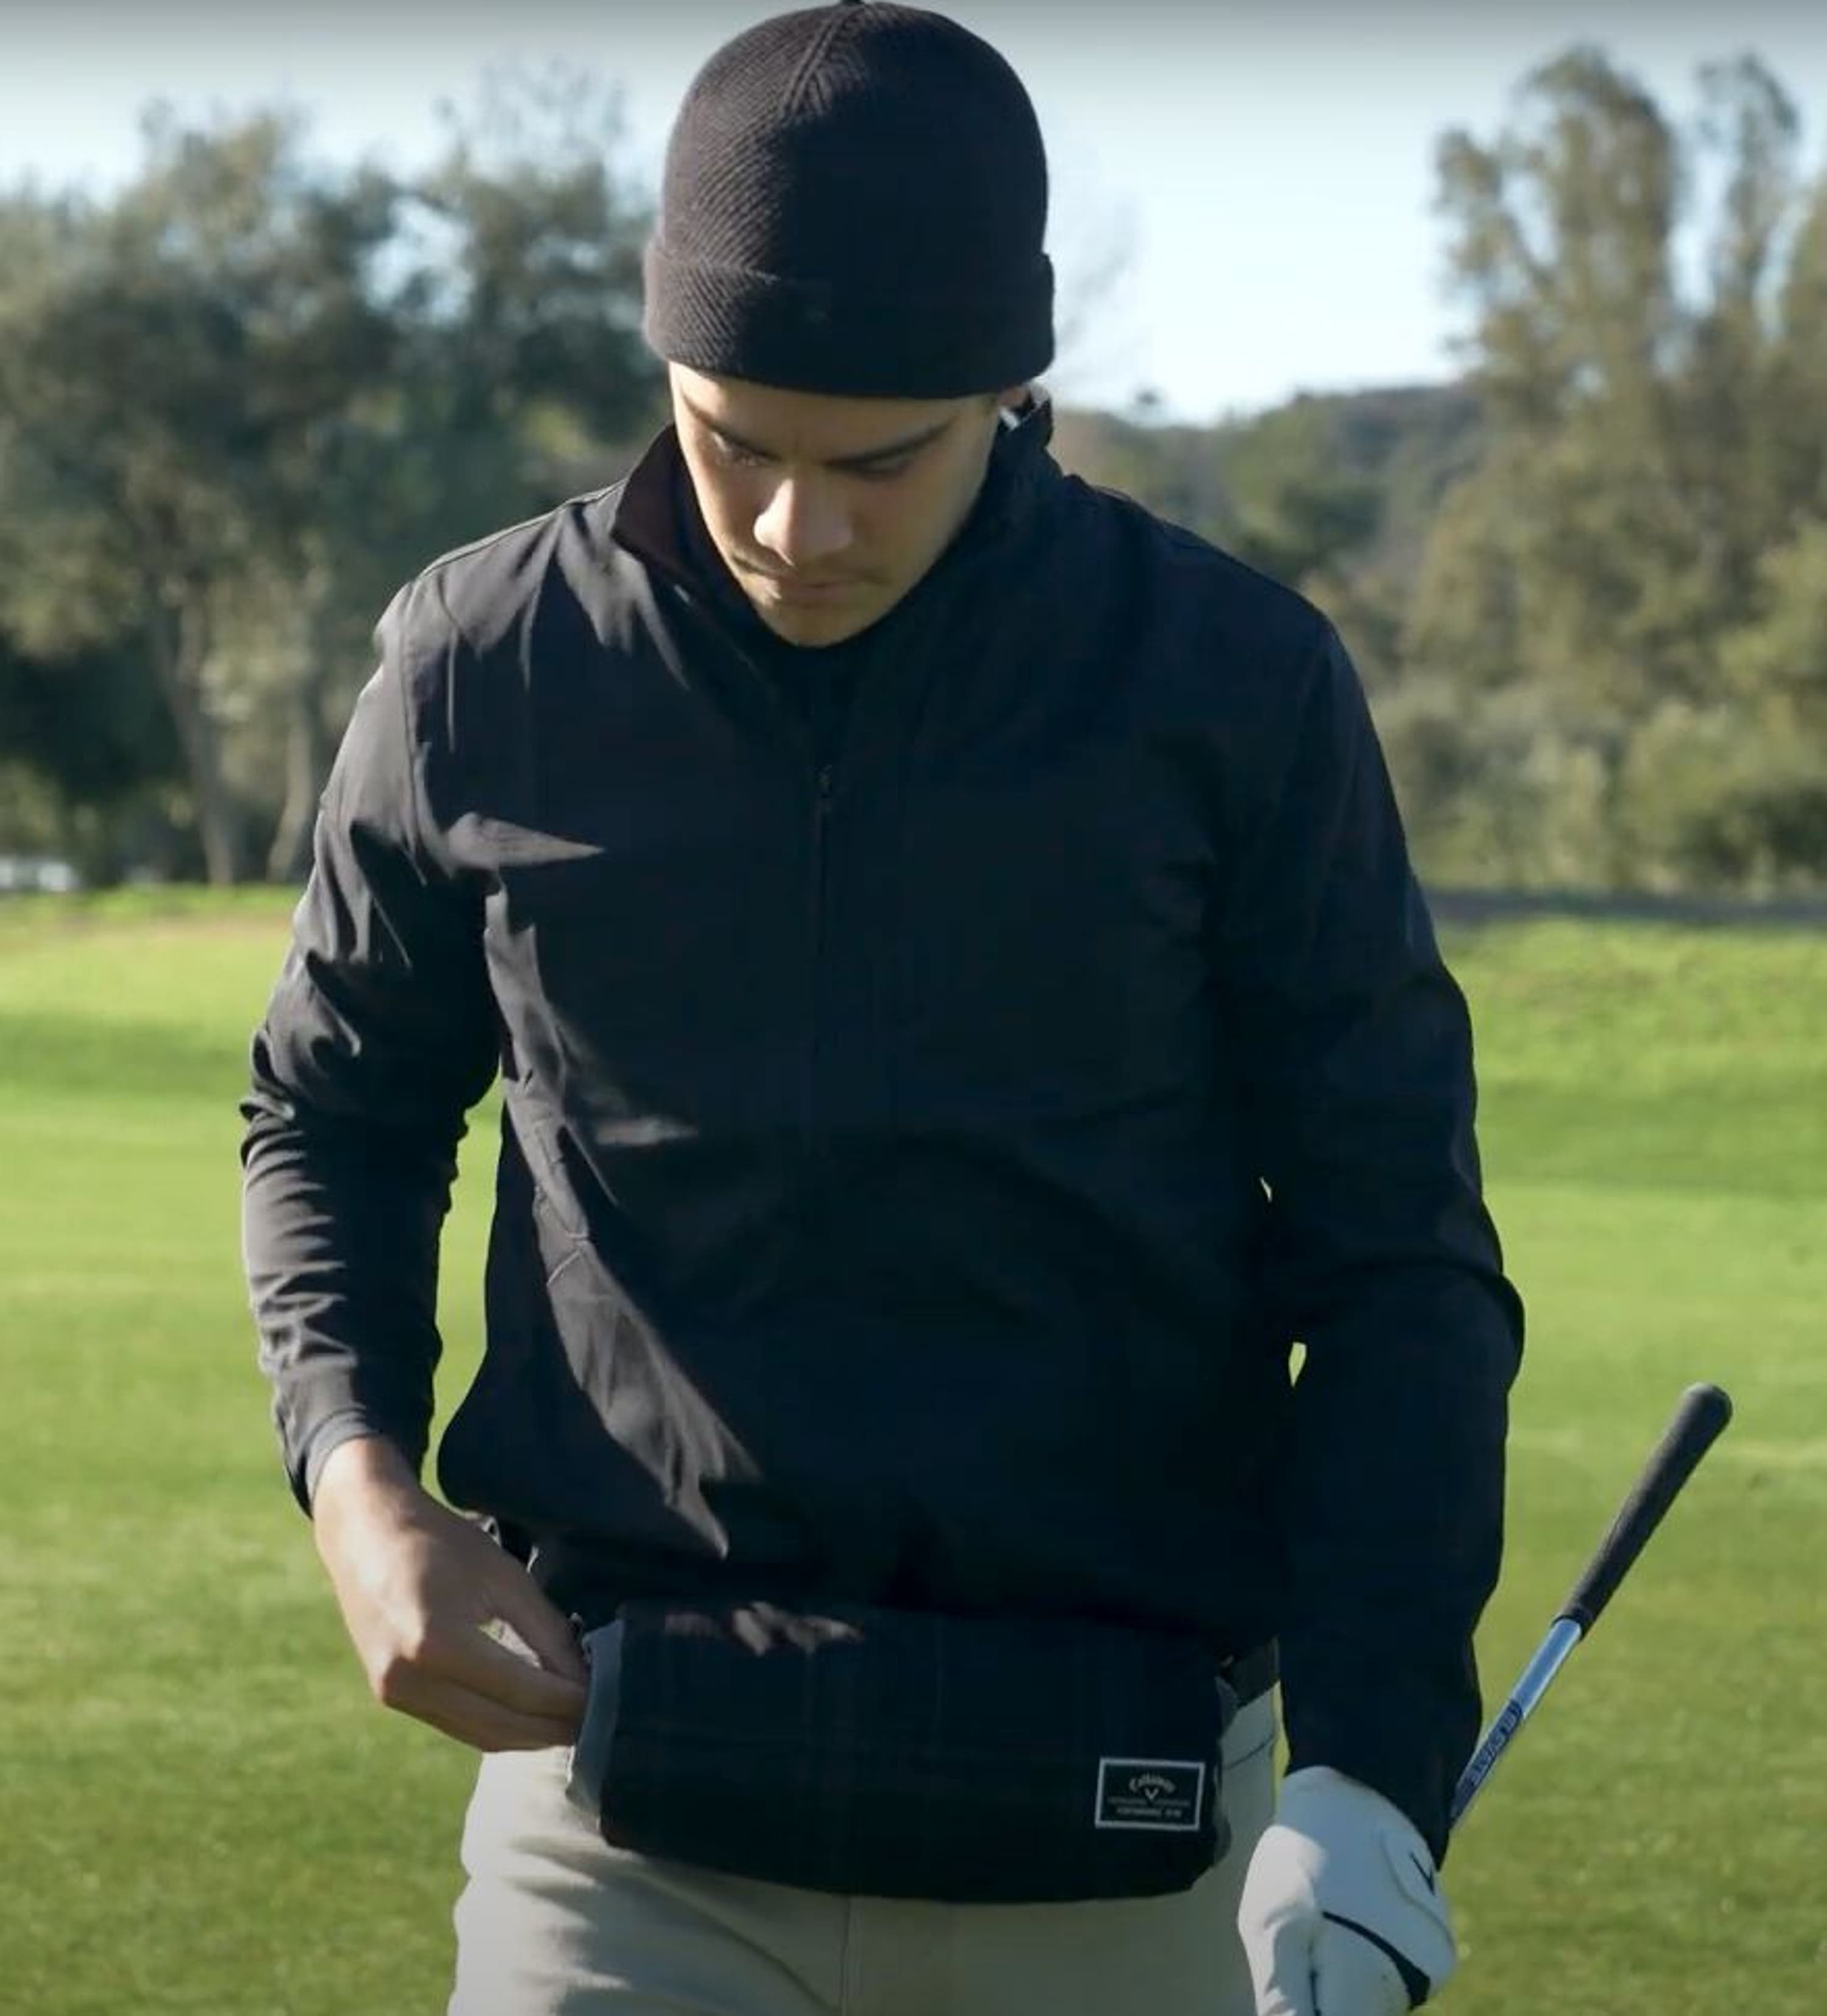 The All New Callaway Performance Gear Elements